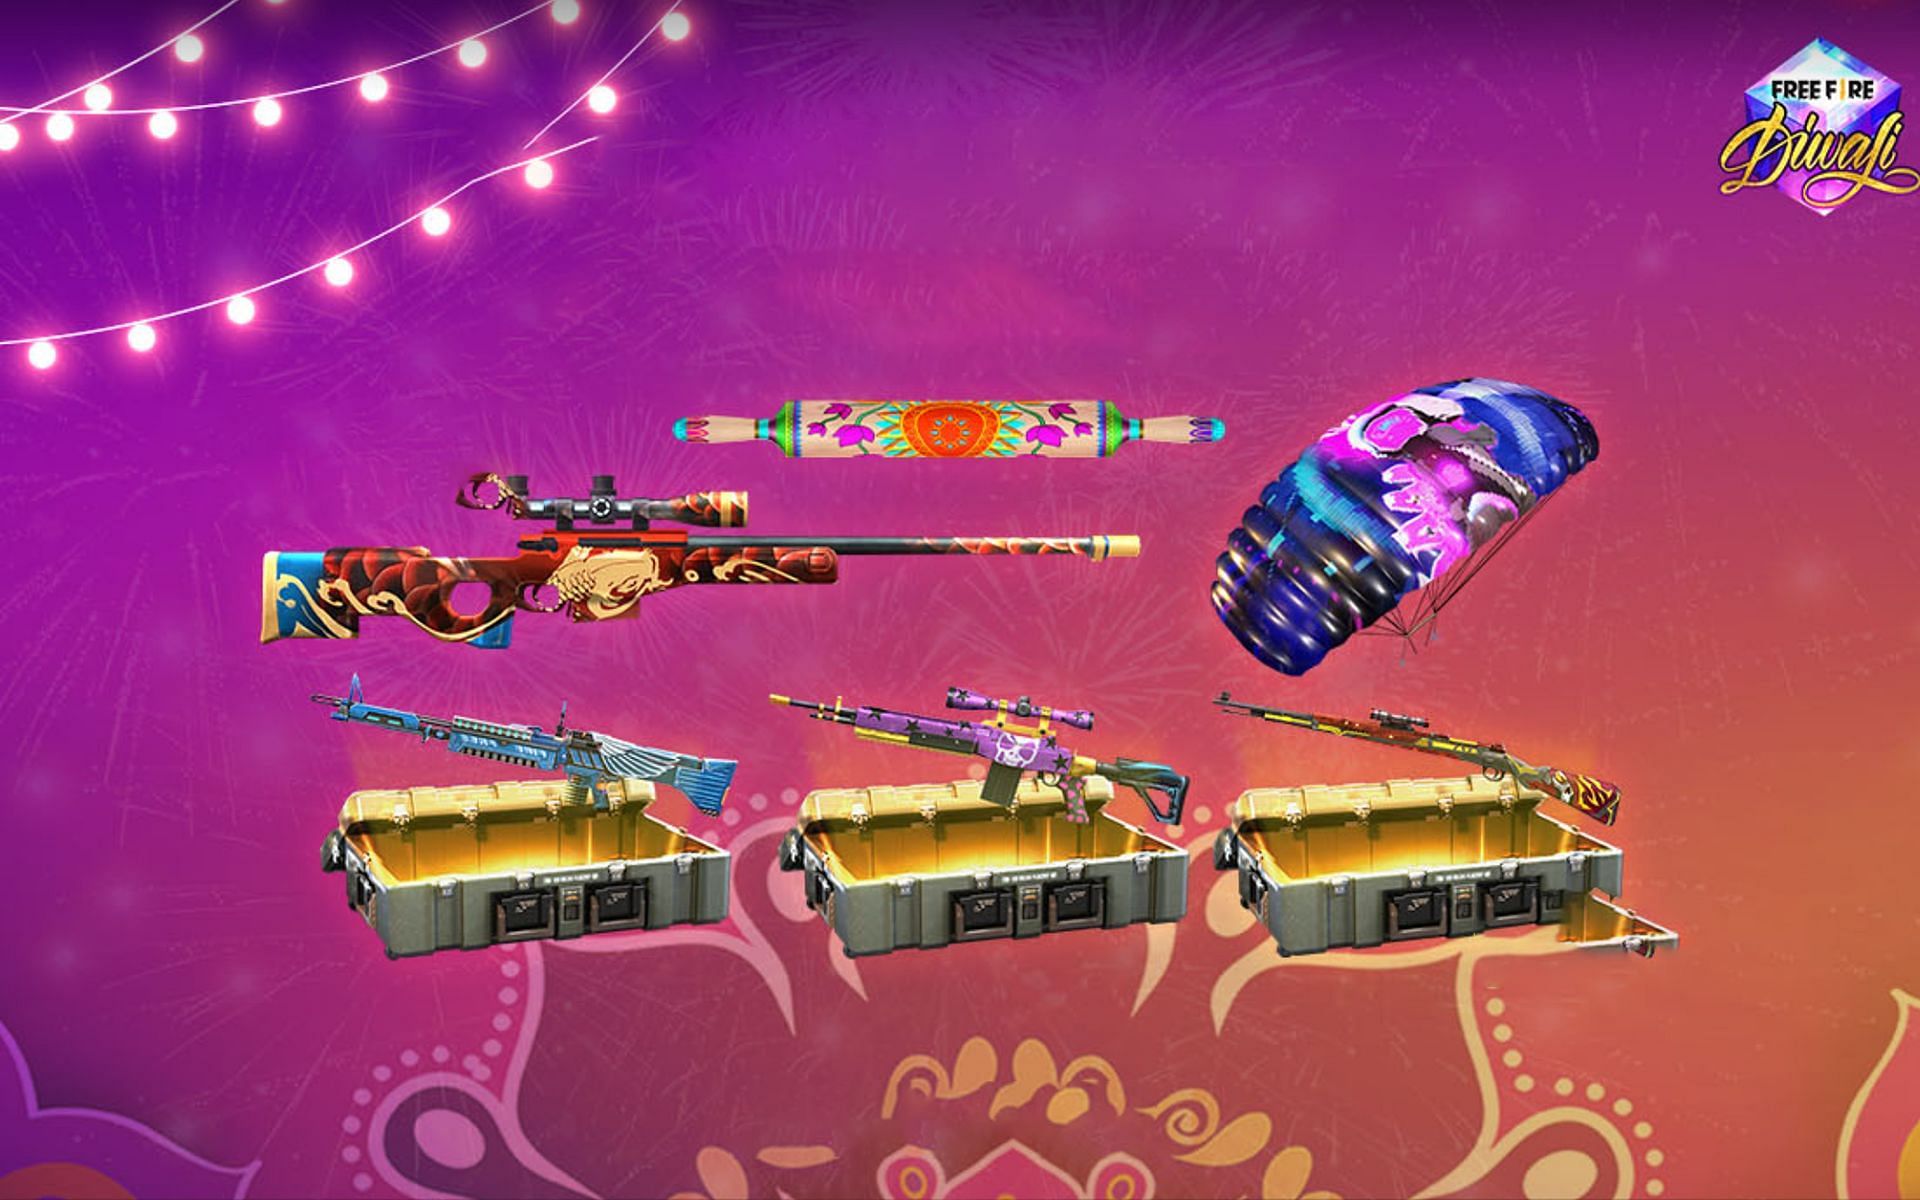 A number of rewards are available in the new event (Image via Free Fire)